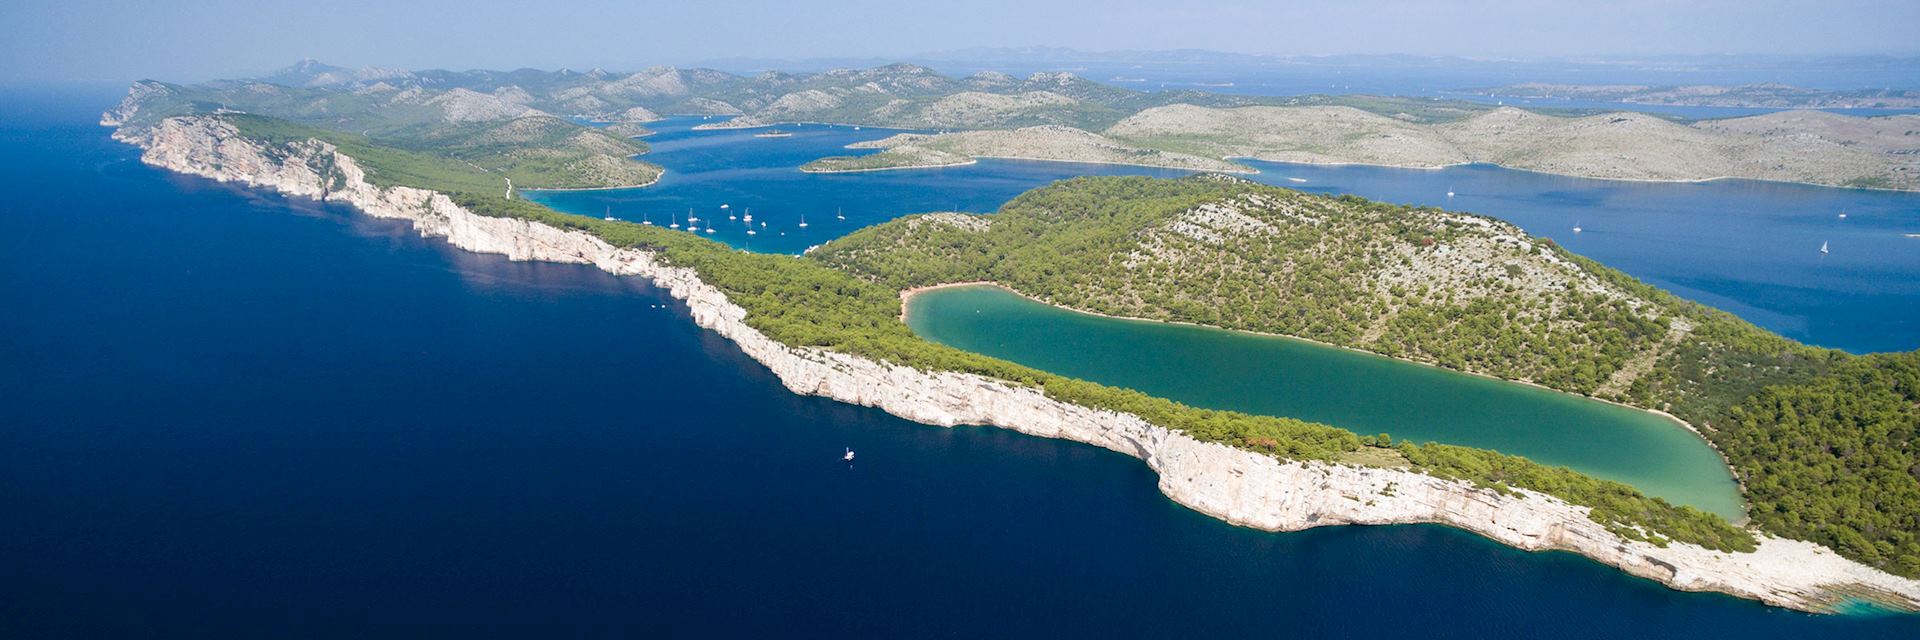 Tailor-made vacations to the Dalmatian Coast | Audley Travel